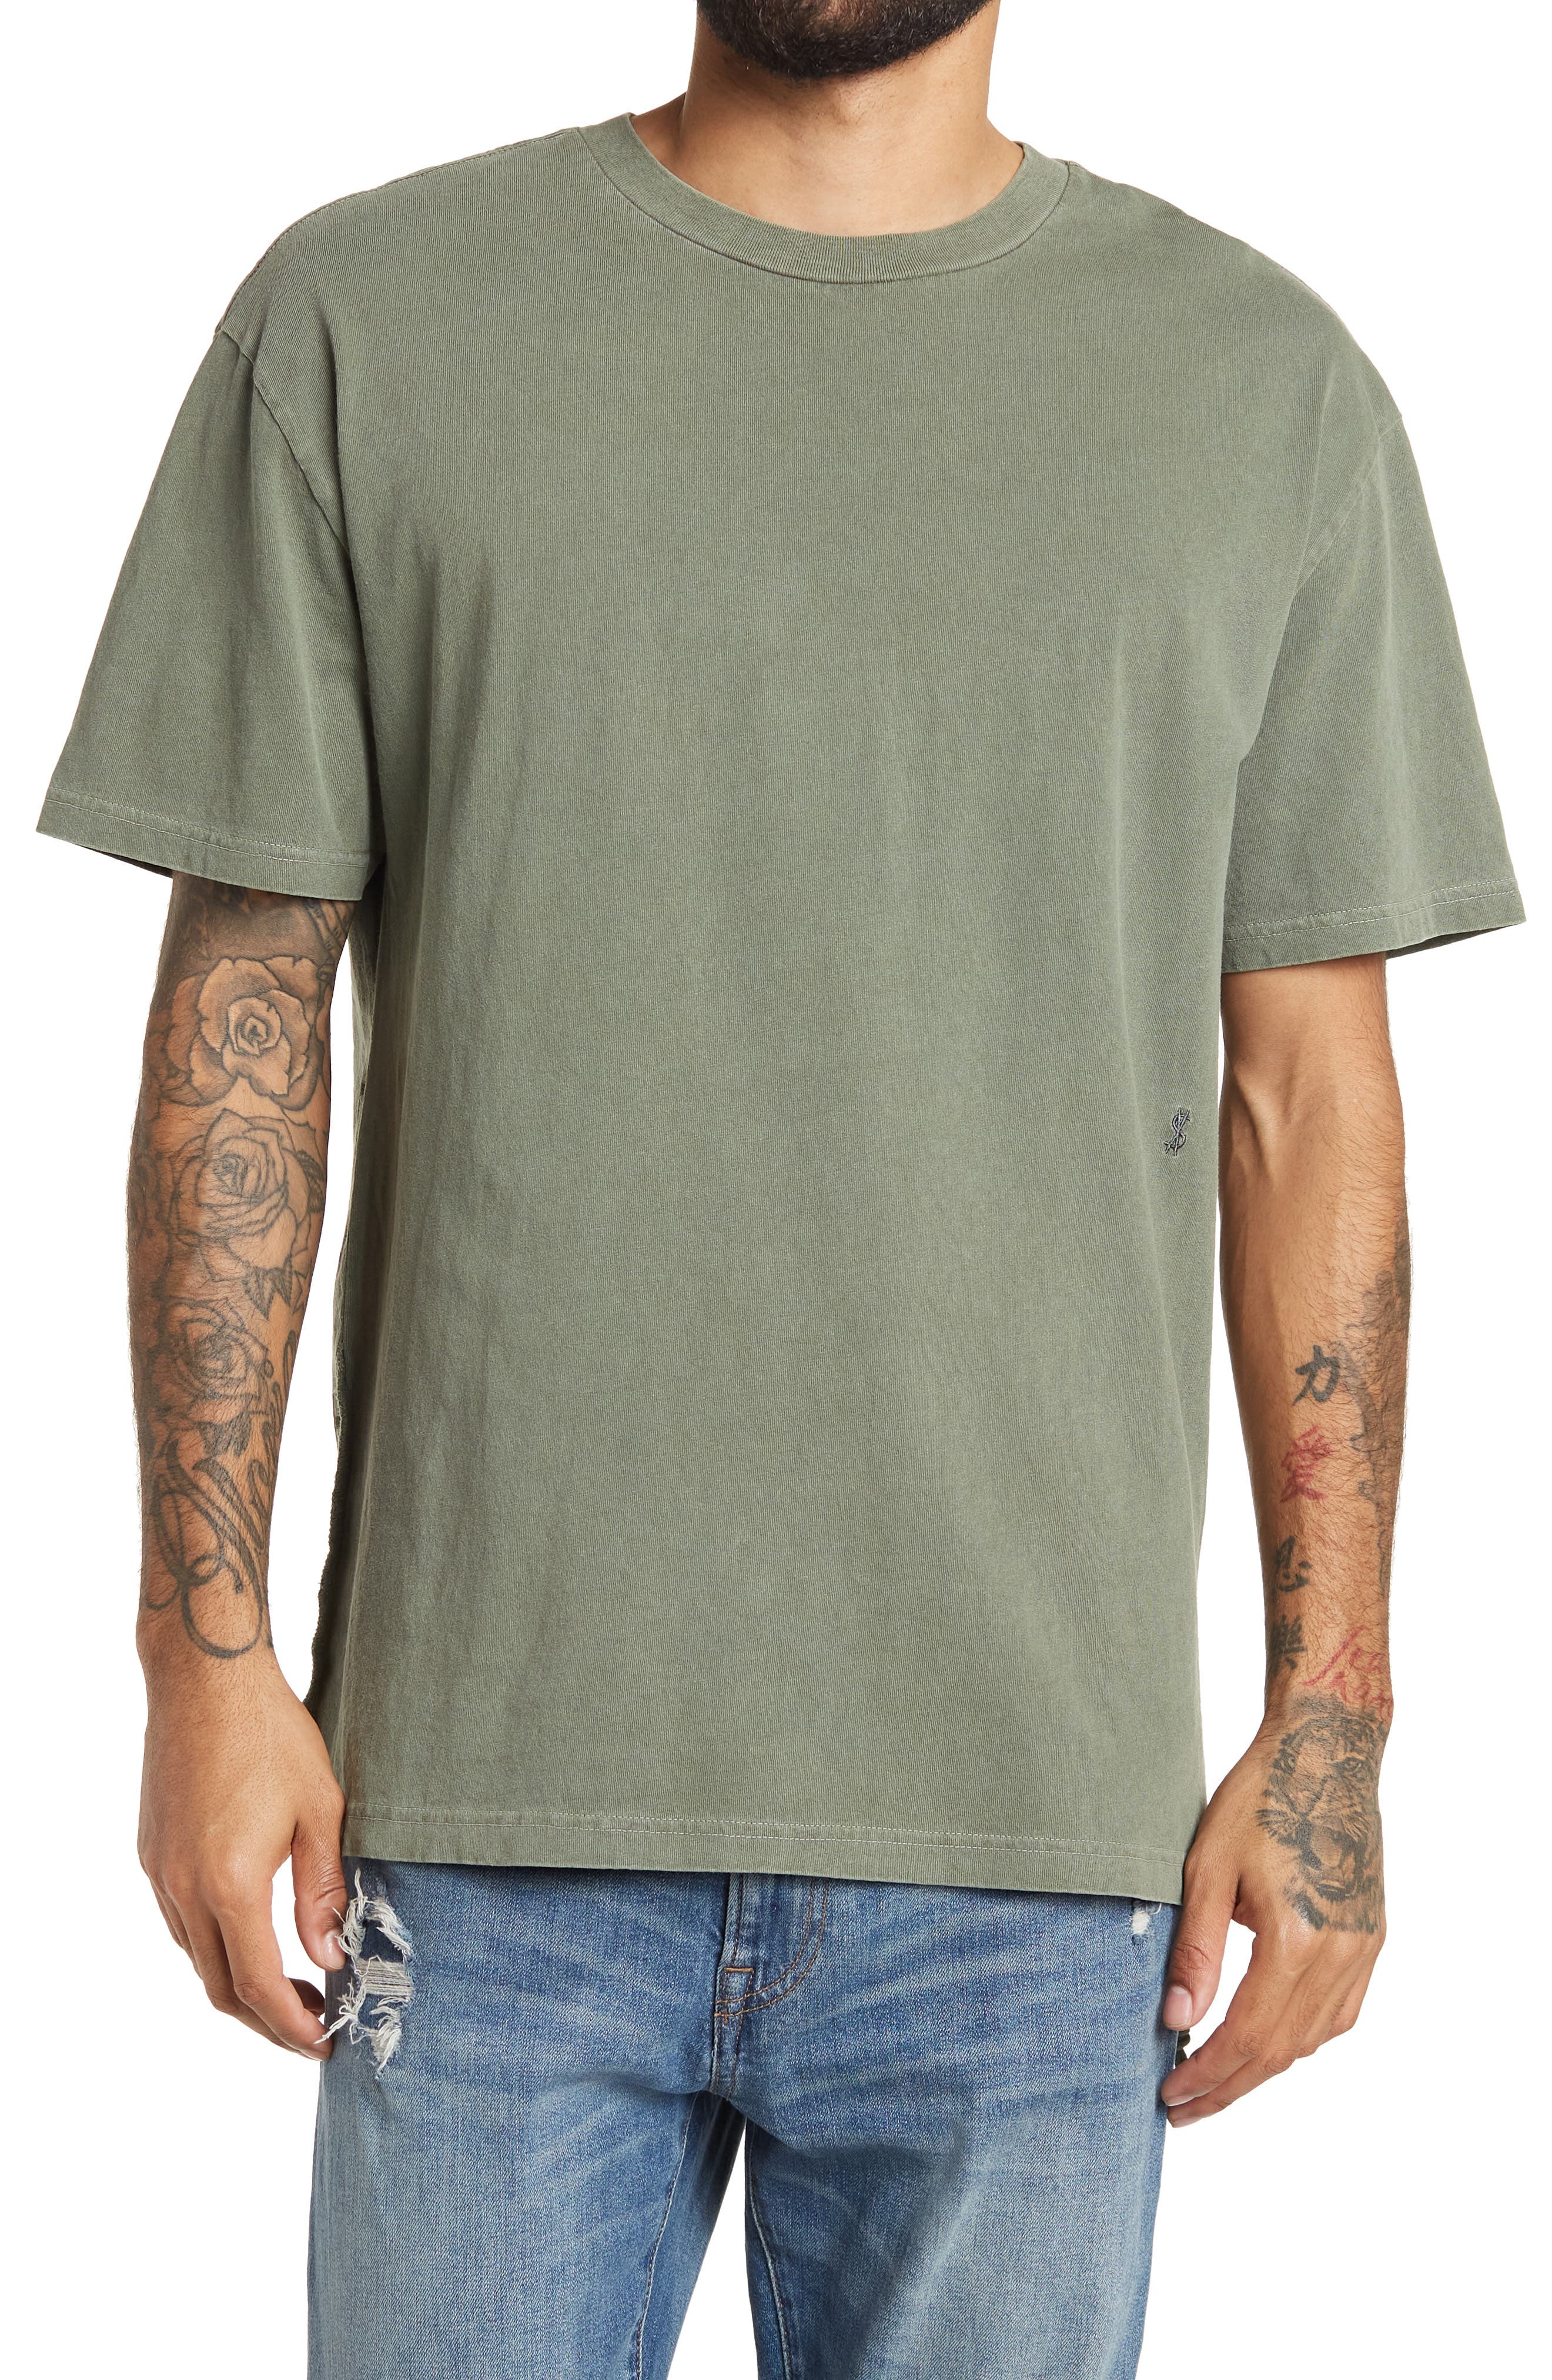 Ksubi Biggie Men's Cotton Jersey T-Shirt in Green at Nordstrom, Size Small